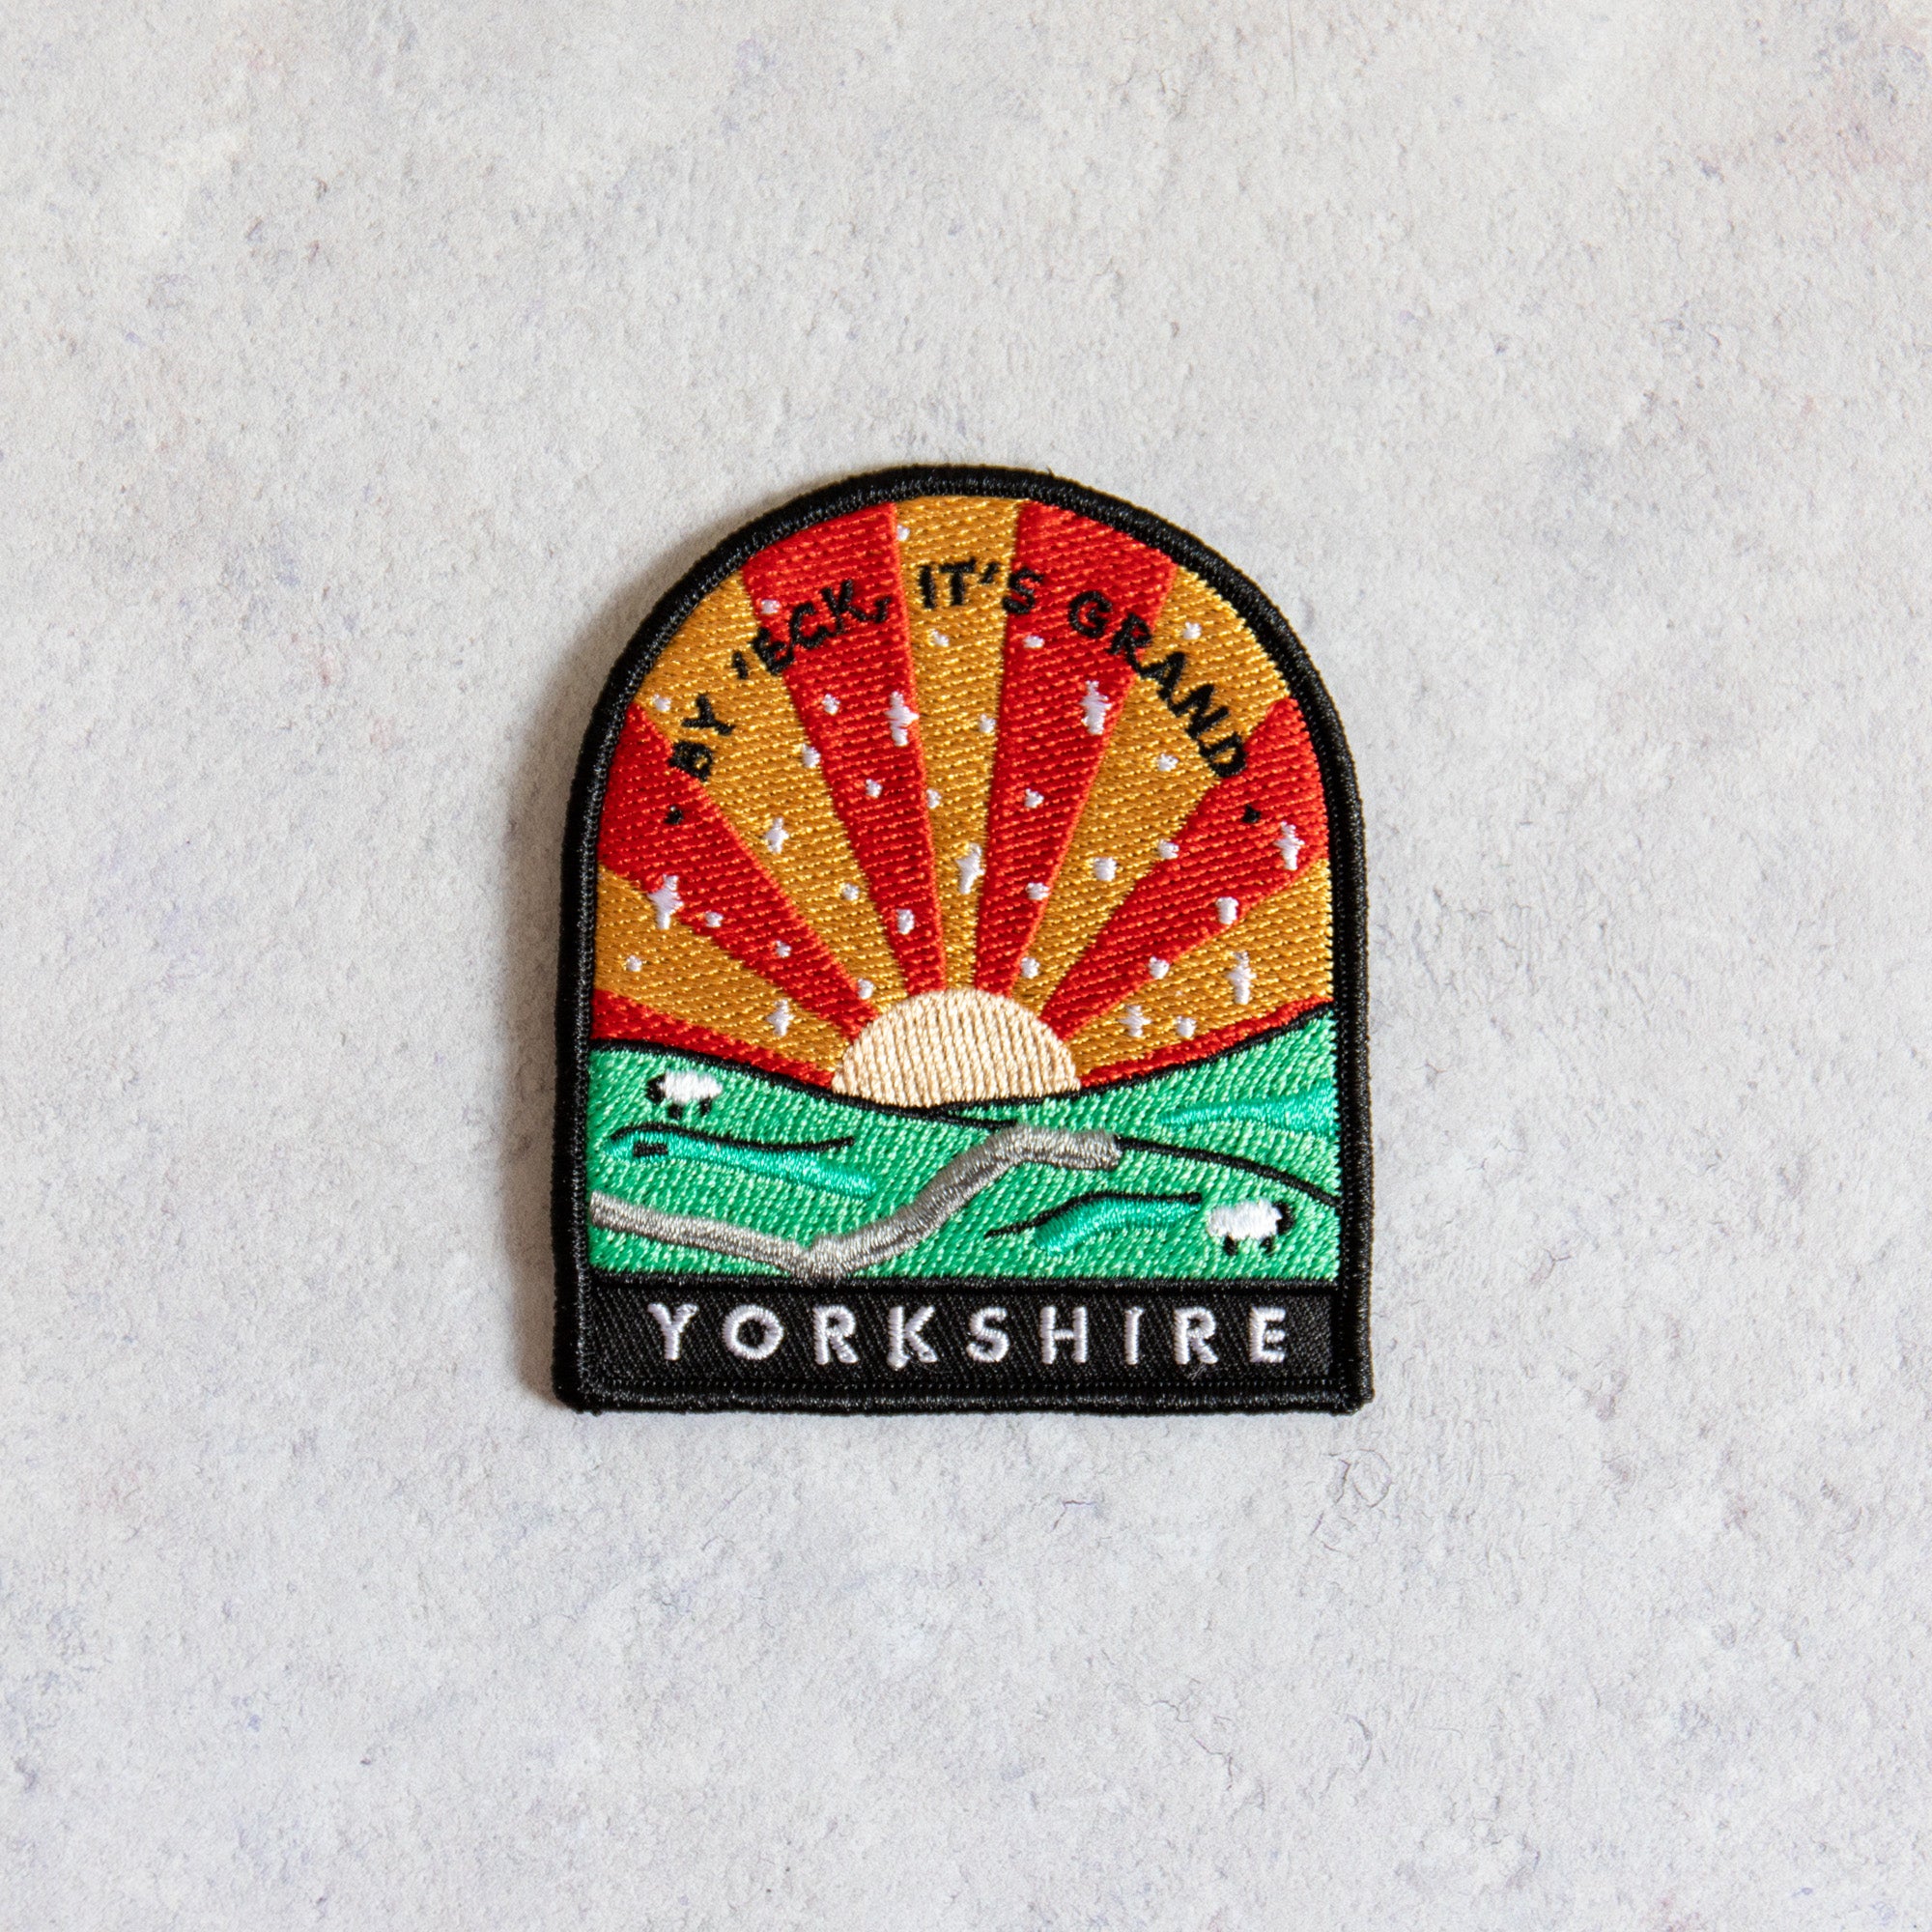 By 'Eck, It's Grand Yorkshire Patch - Finest Imaginary